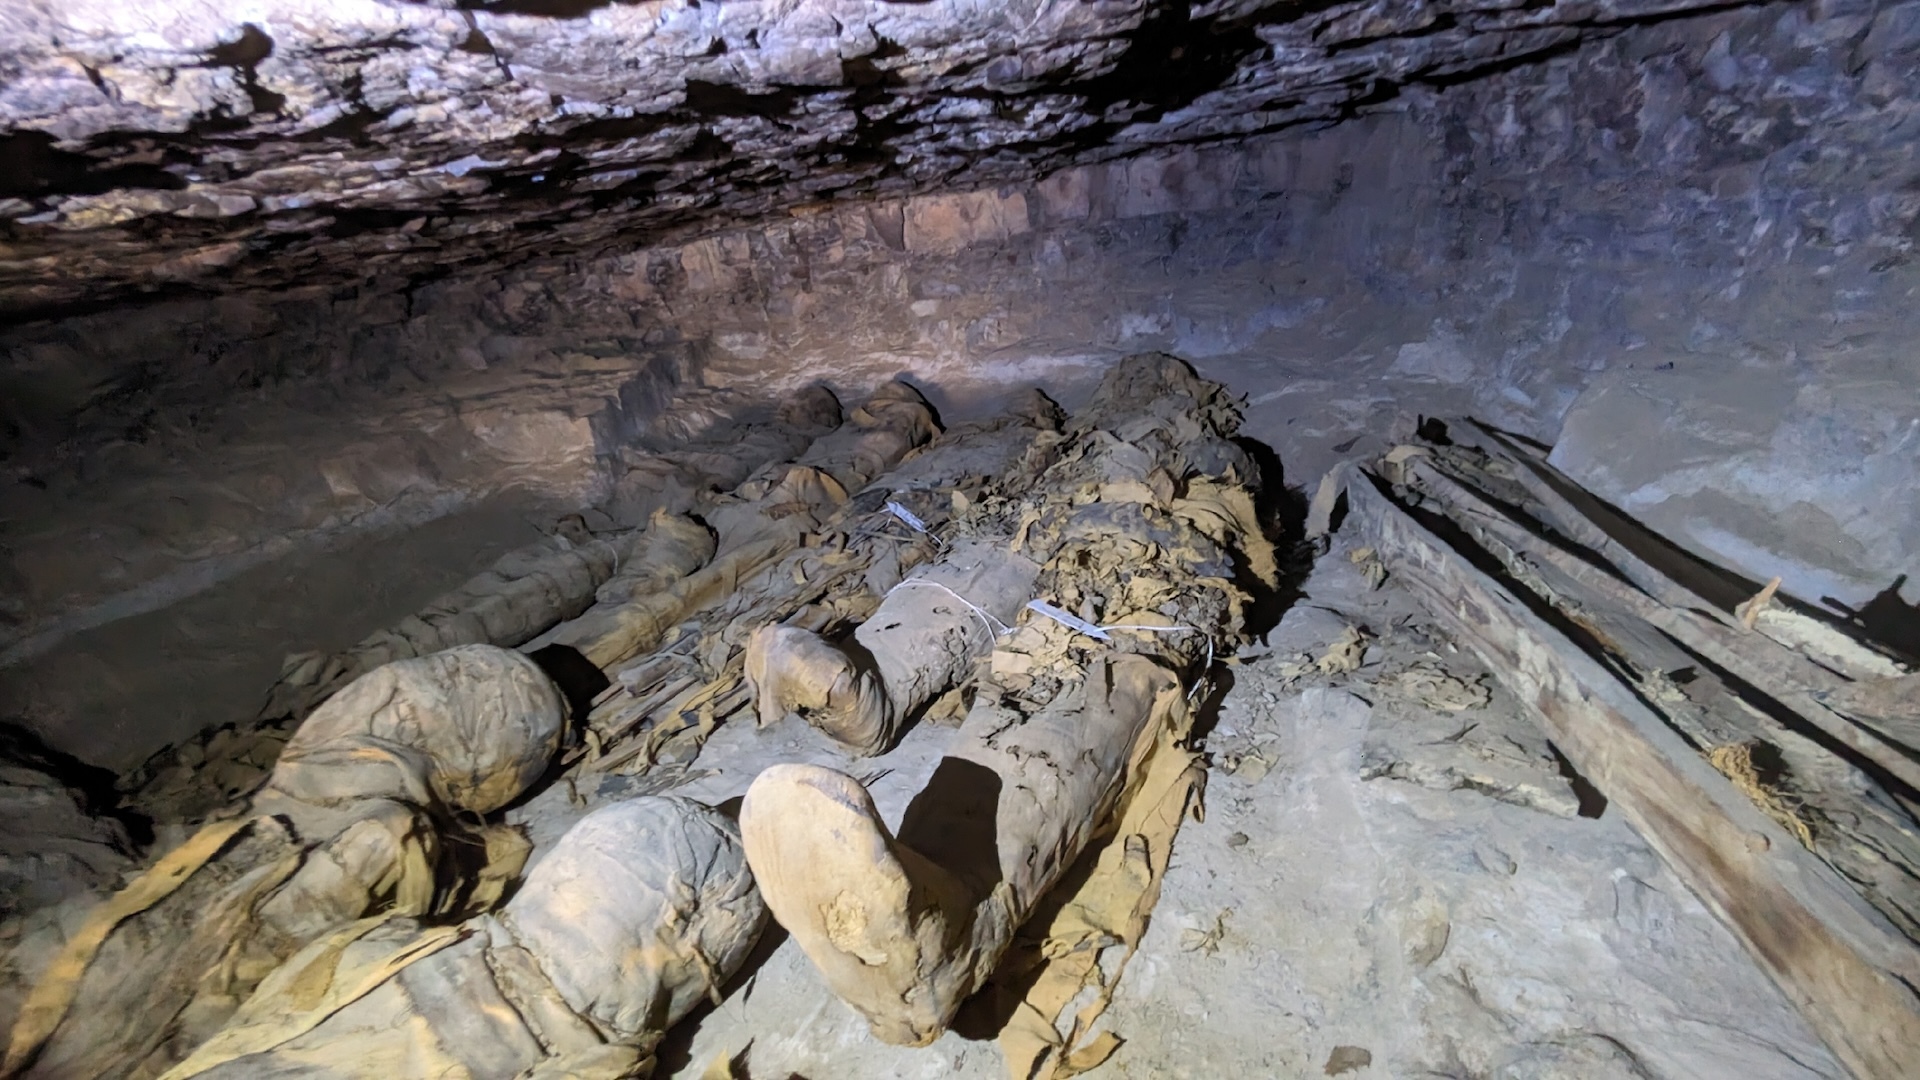 Aswan mummies found in a tomb that seems to have been used for a family burial.